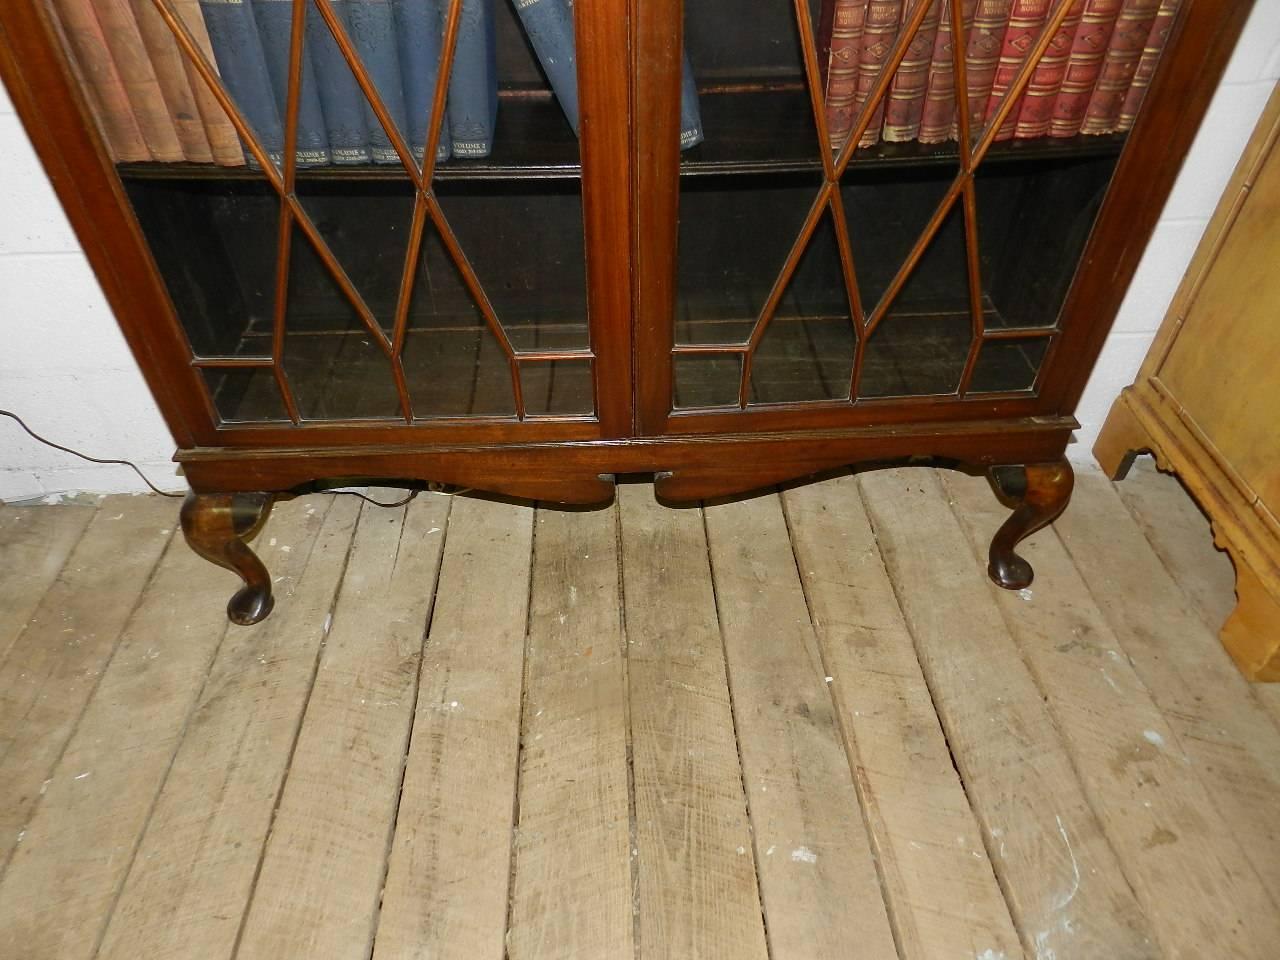 Mahogany Astragal Glazed Bookcase In Excellent Condition For Sale In Millwood, VA